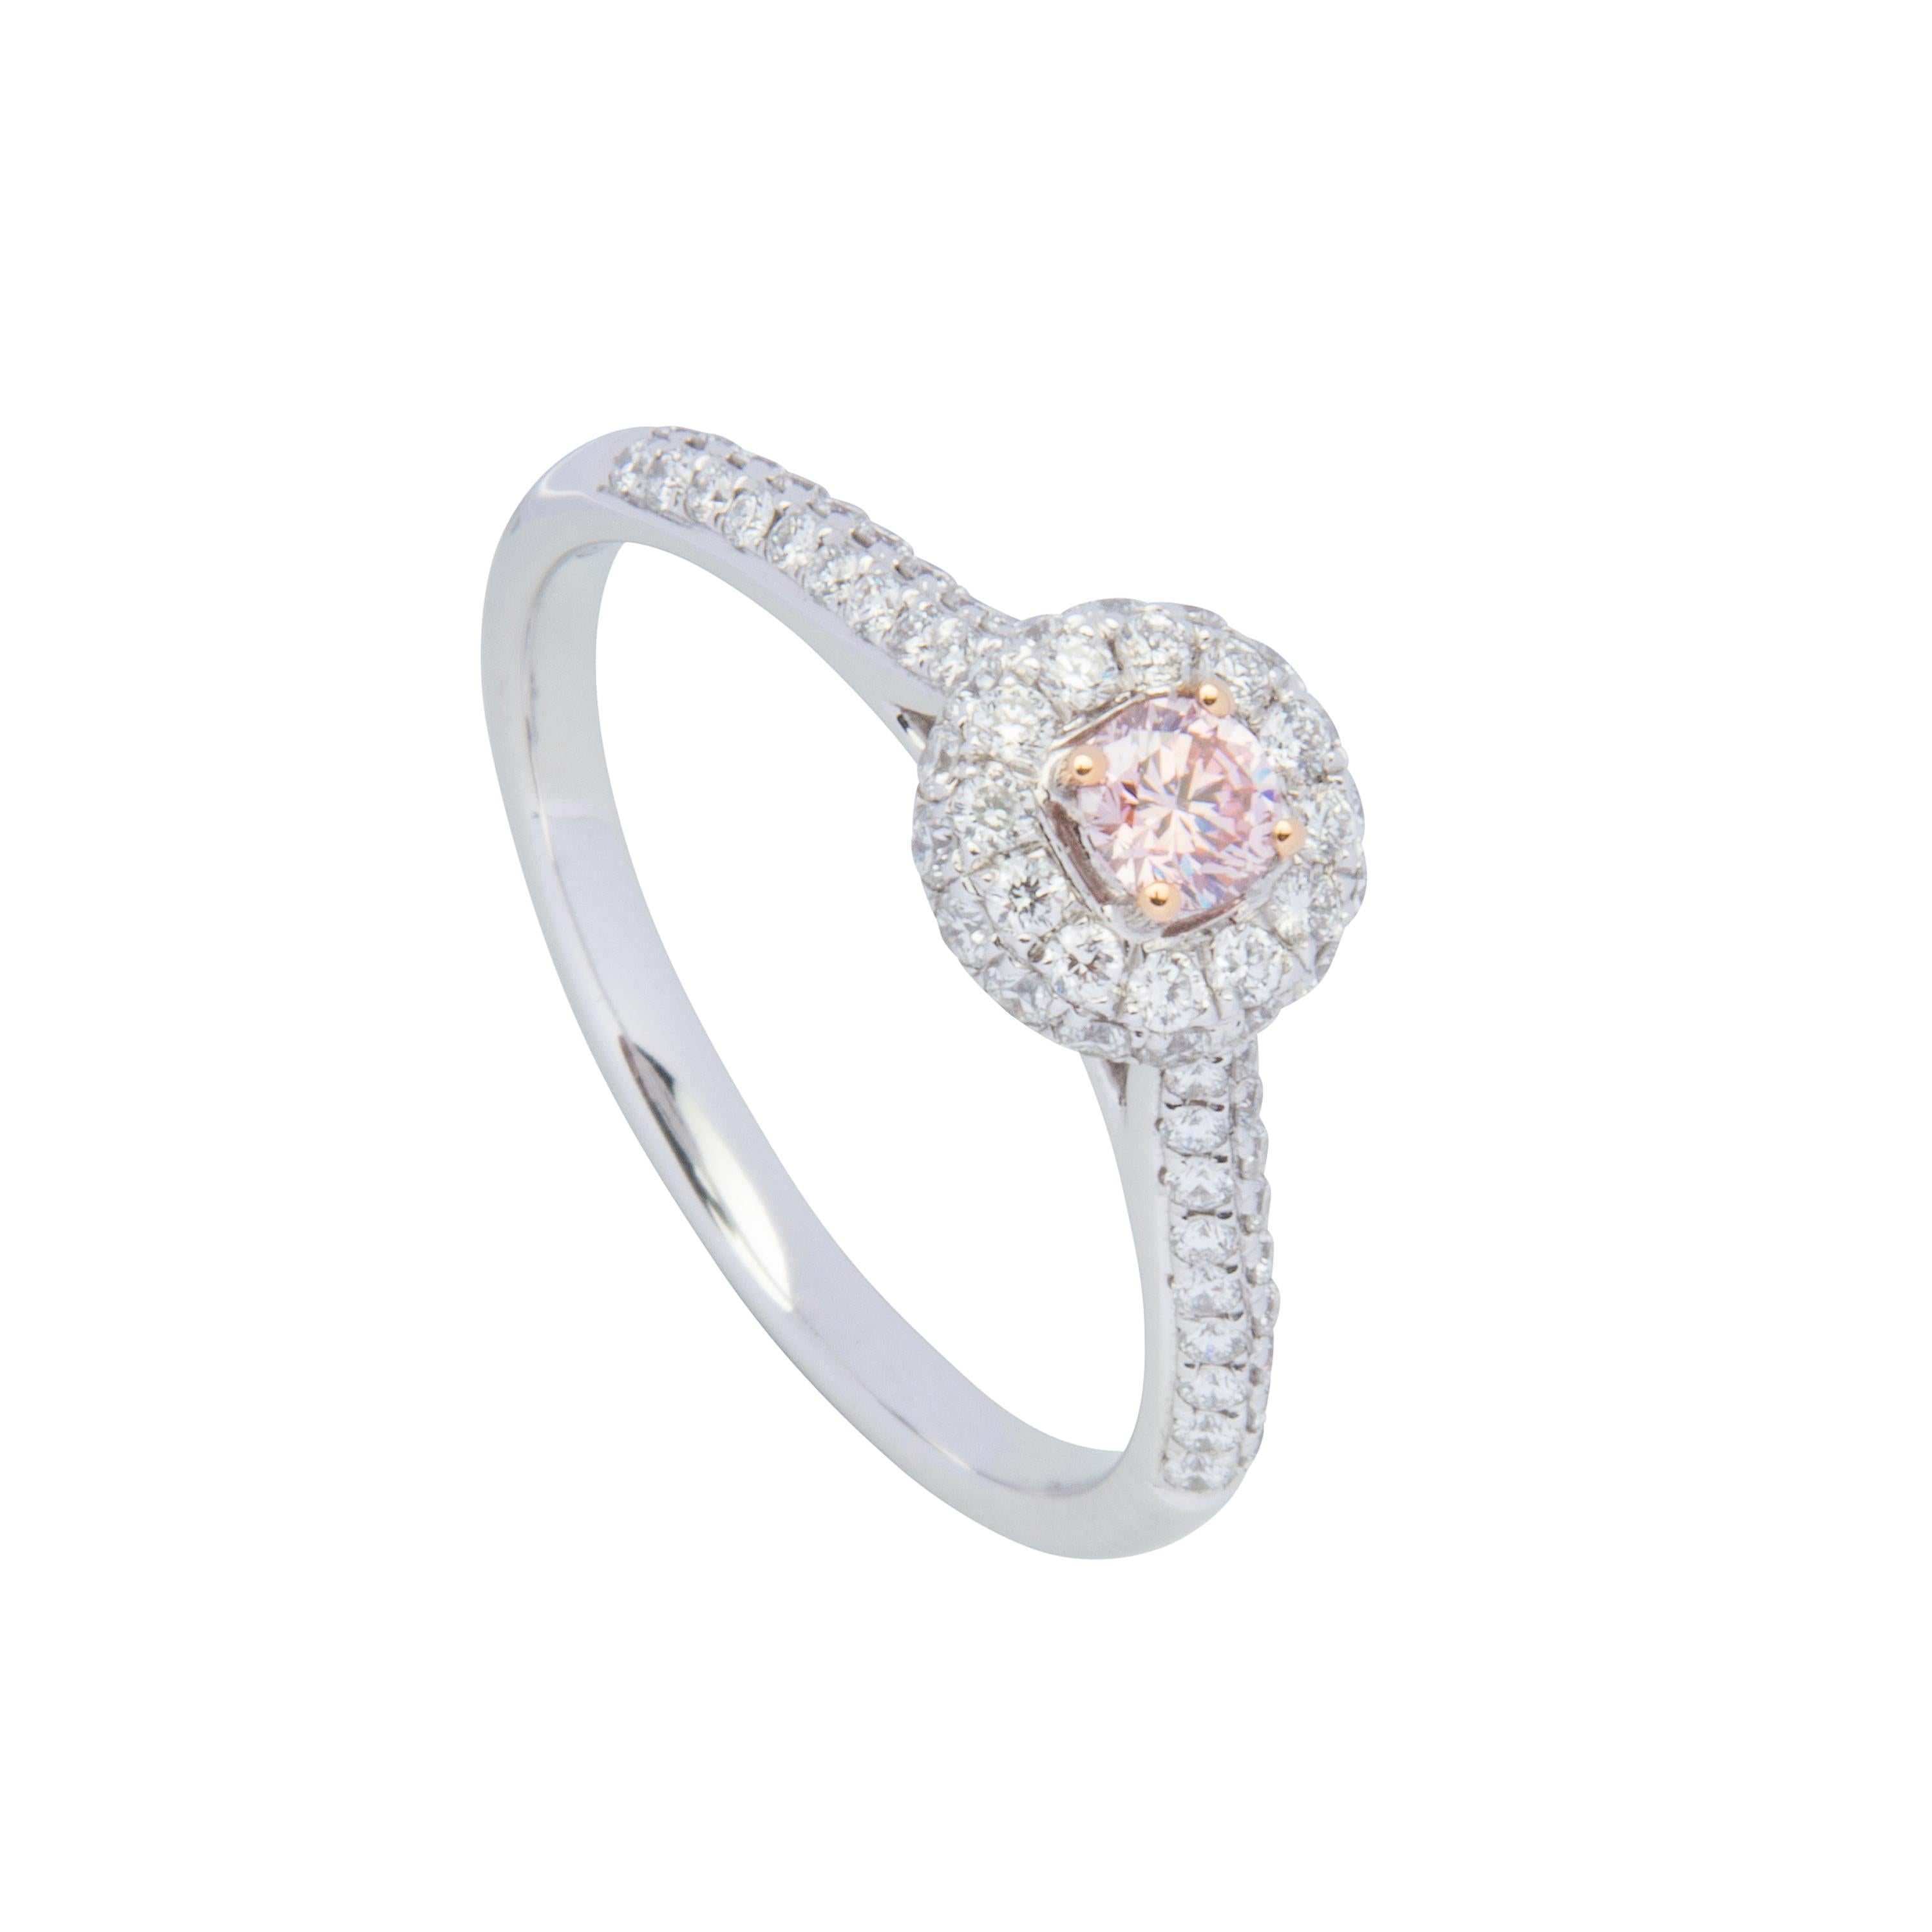 18 karat white and rose gold ring featuring 1 certified Argyle Pink Diamond 0.15ct PC1/VS1, also set with 72 round brilliant cut diamonds totalling 0.47ct.  Size US6.5, sizeable +2 or -2.